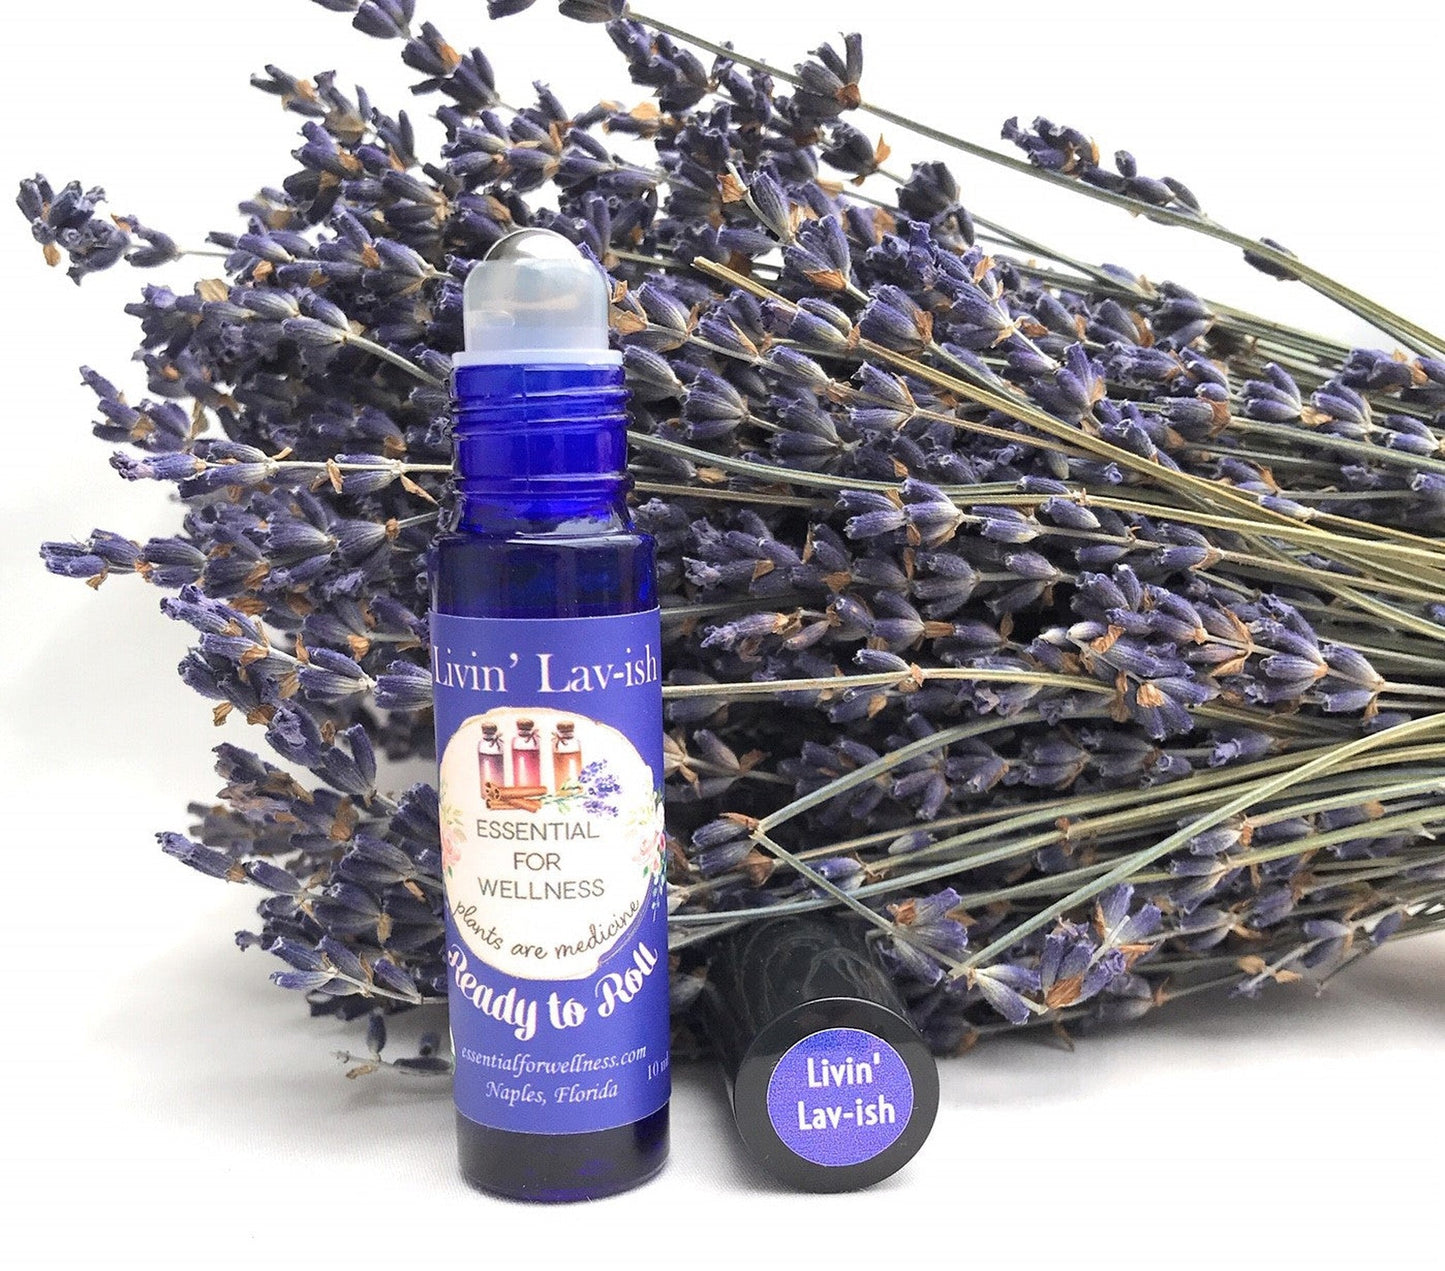 Ready to Roll® Livin' Lav-ish Lavender Organic Essential Oil Blend